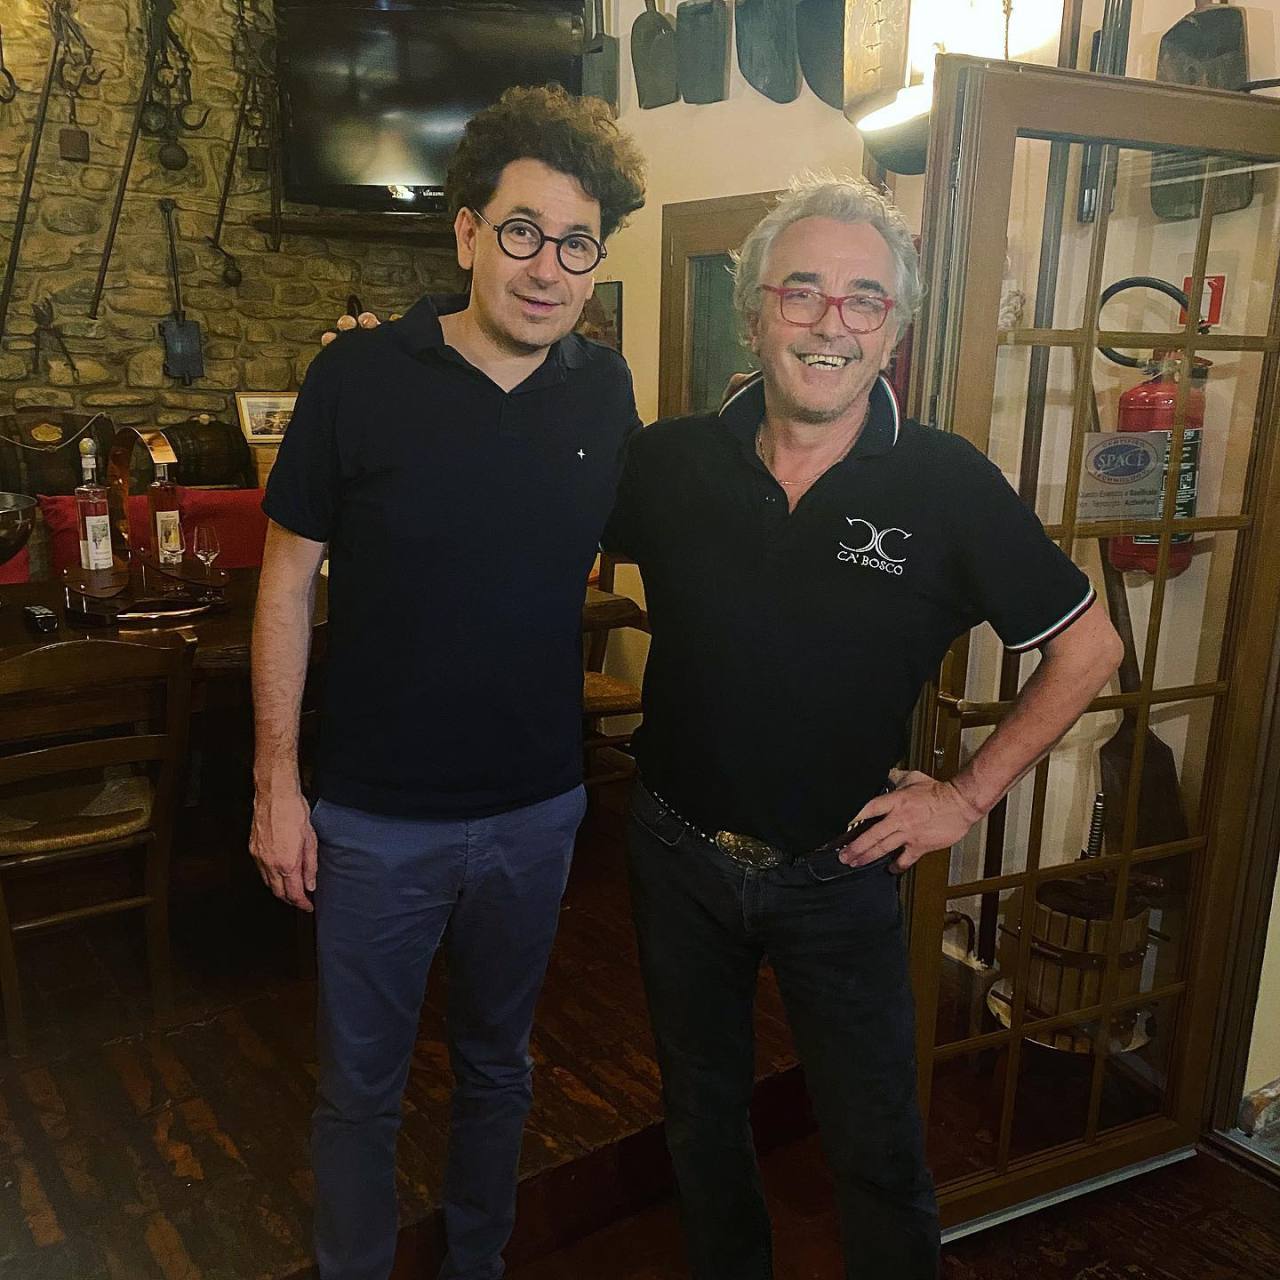 /x/ #mattia binotto#2020 #there is no video posted  #but sounds like matty had good time  #plenty of ferrari people visited the restaurant  #judging by other photos #seb included#big hair#old glasses #they were cute  #I like the new ones better though #casual mattia #matt and banter  #le risate he wrote  #matt was cracking jokes  #fun person to hang out with  #I dont want to be disrespectful  #but those trousers look  #like theyre very soft to the touch